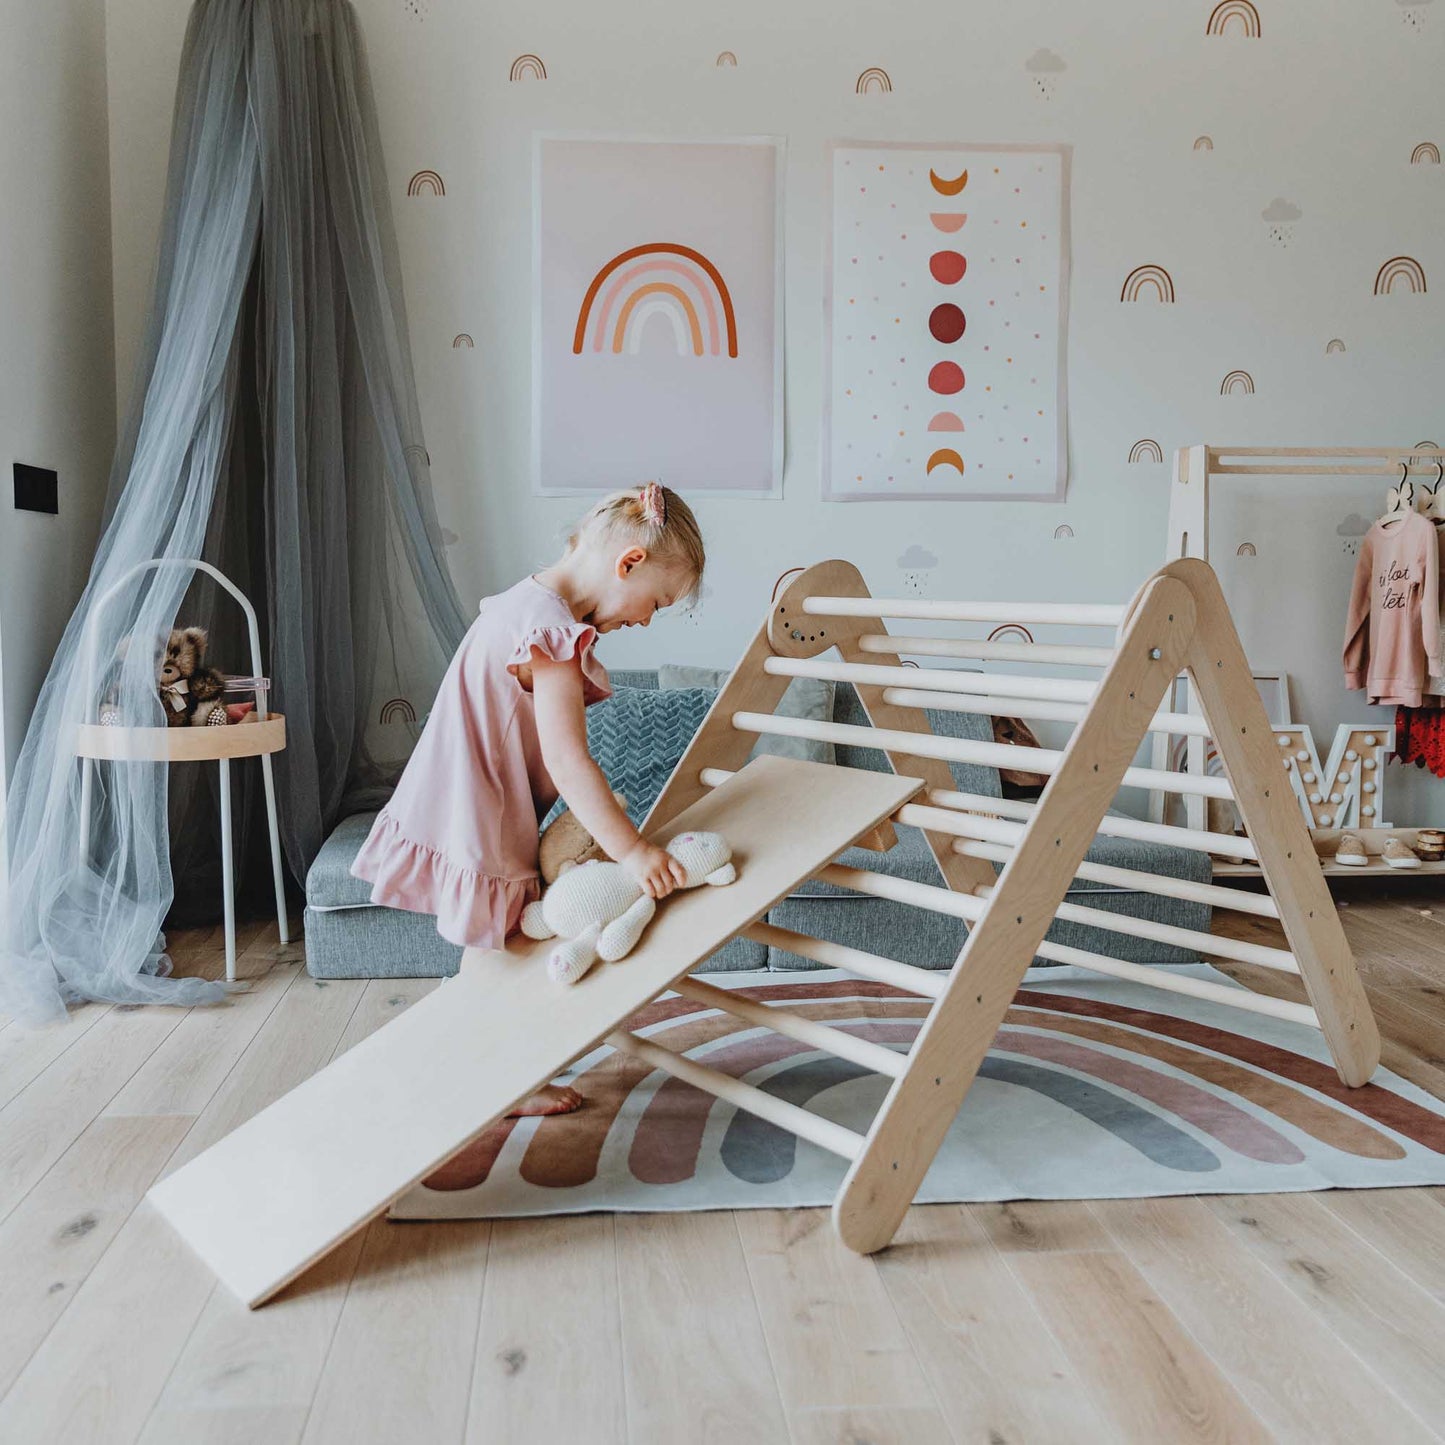 A little girl playing with a Foldable climbing triangle + Transformable climbing gym + a ramp in her room.